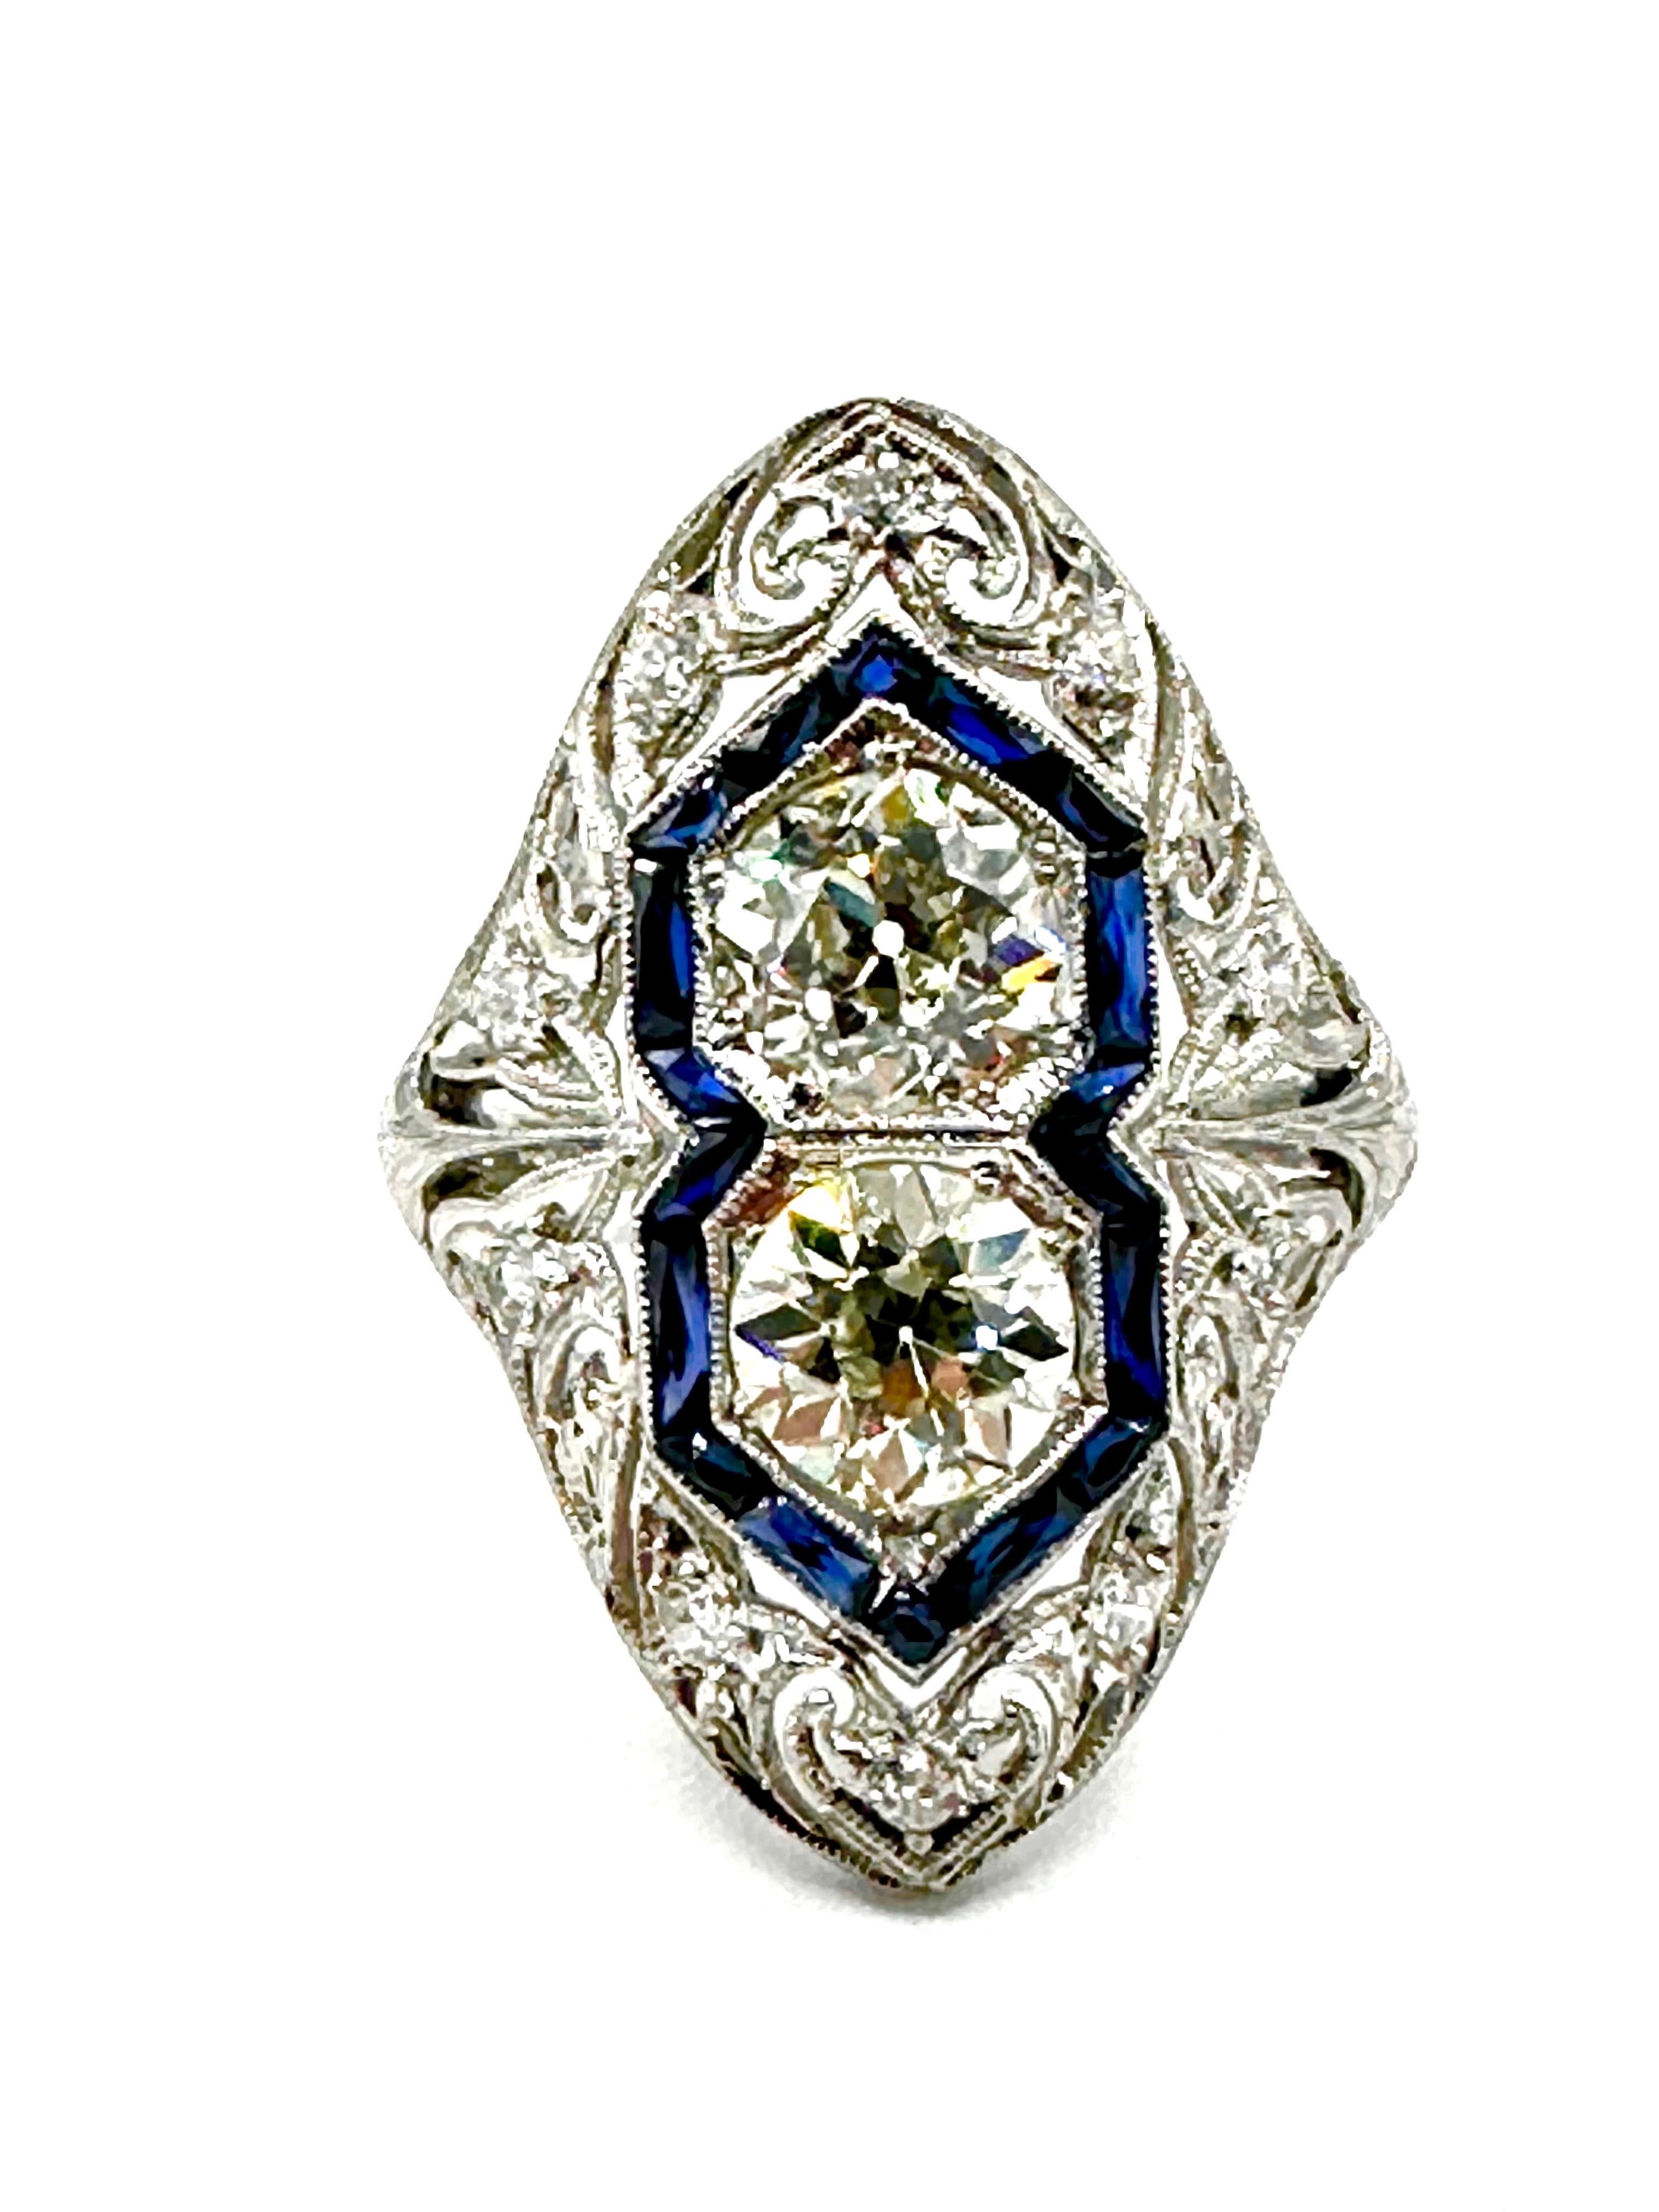 A mind blowing stunner of an Art Deco ring!  This ring features two large old European cut Diamonds in the center, surrounded by a single row frame of French cut Sapphires, and open platinum metal work with single cut Diamonds.  The center Diamonds